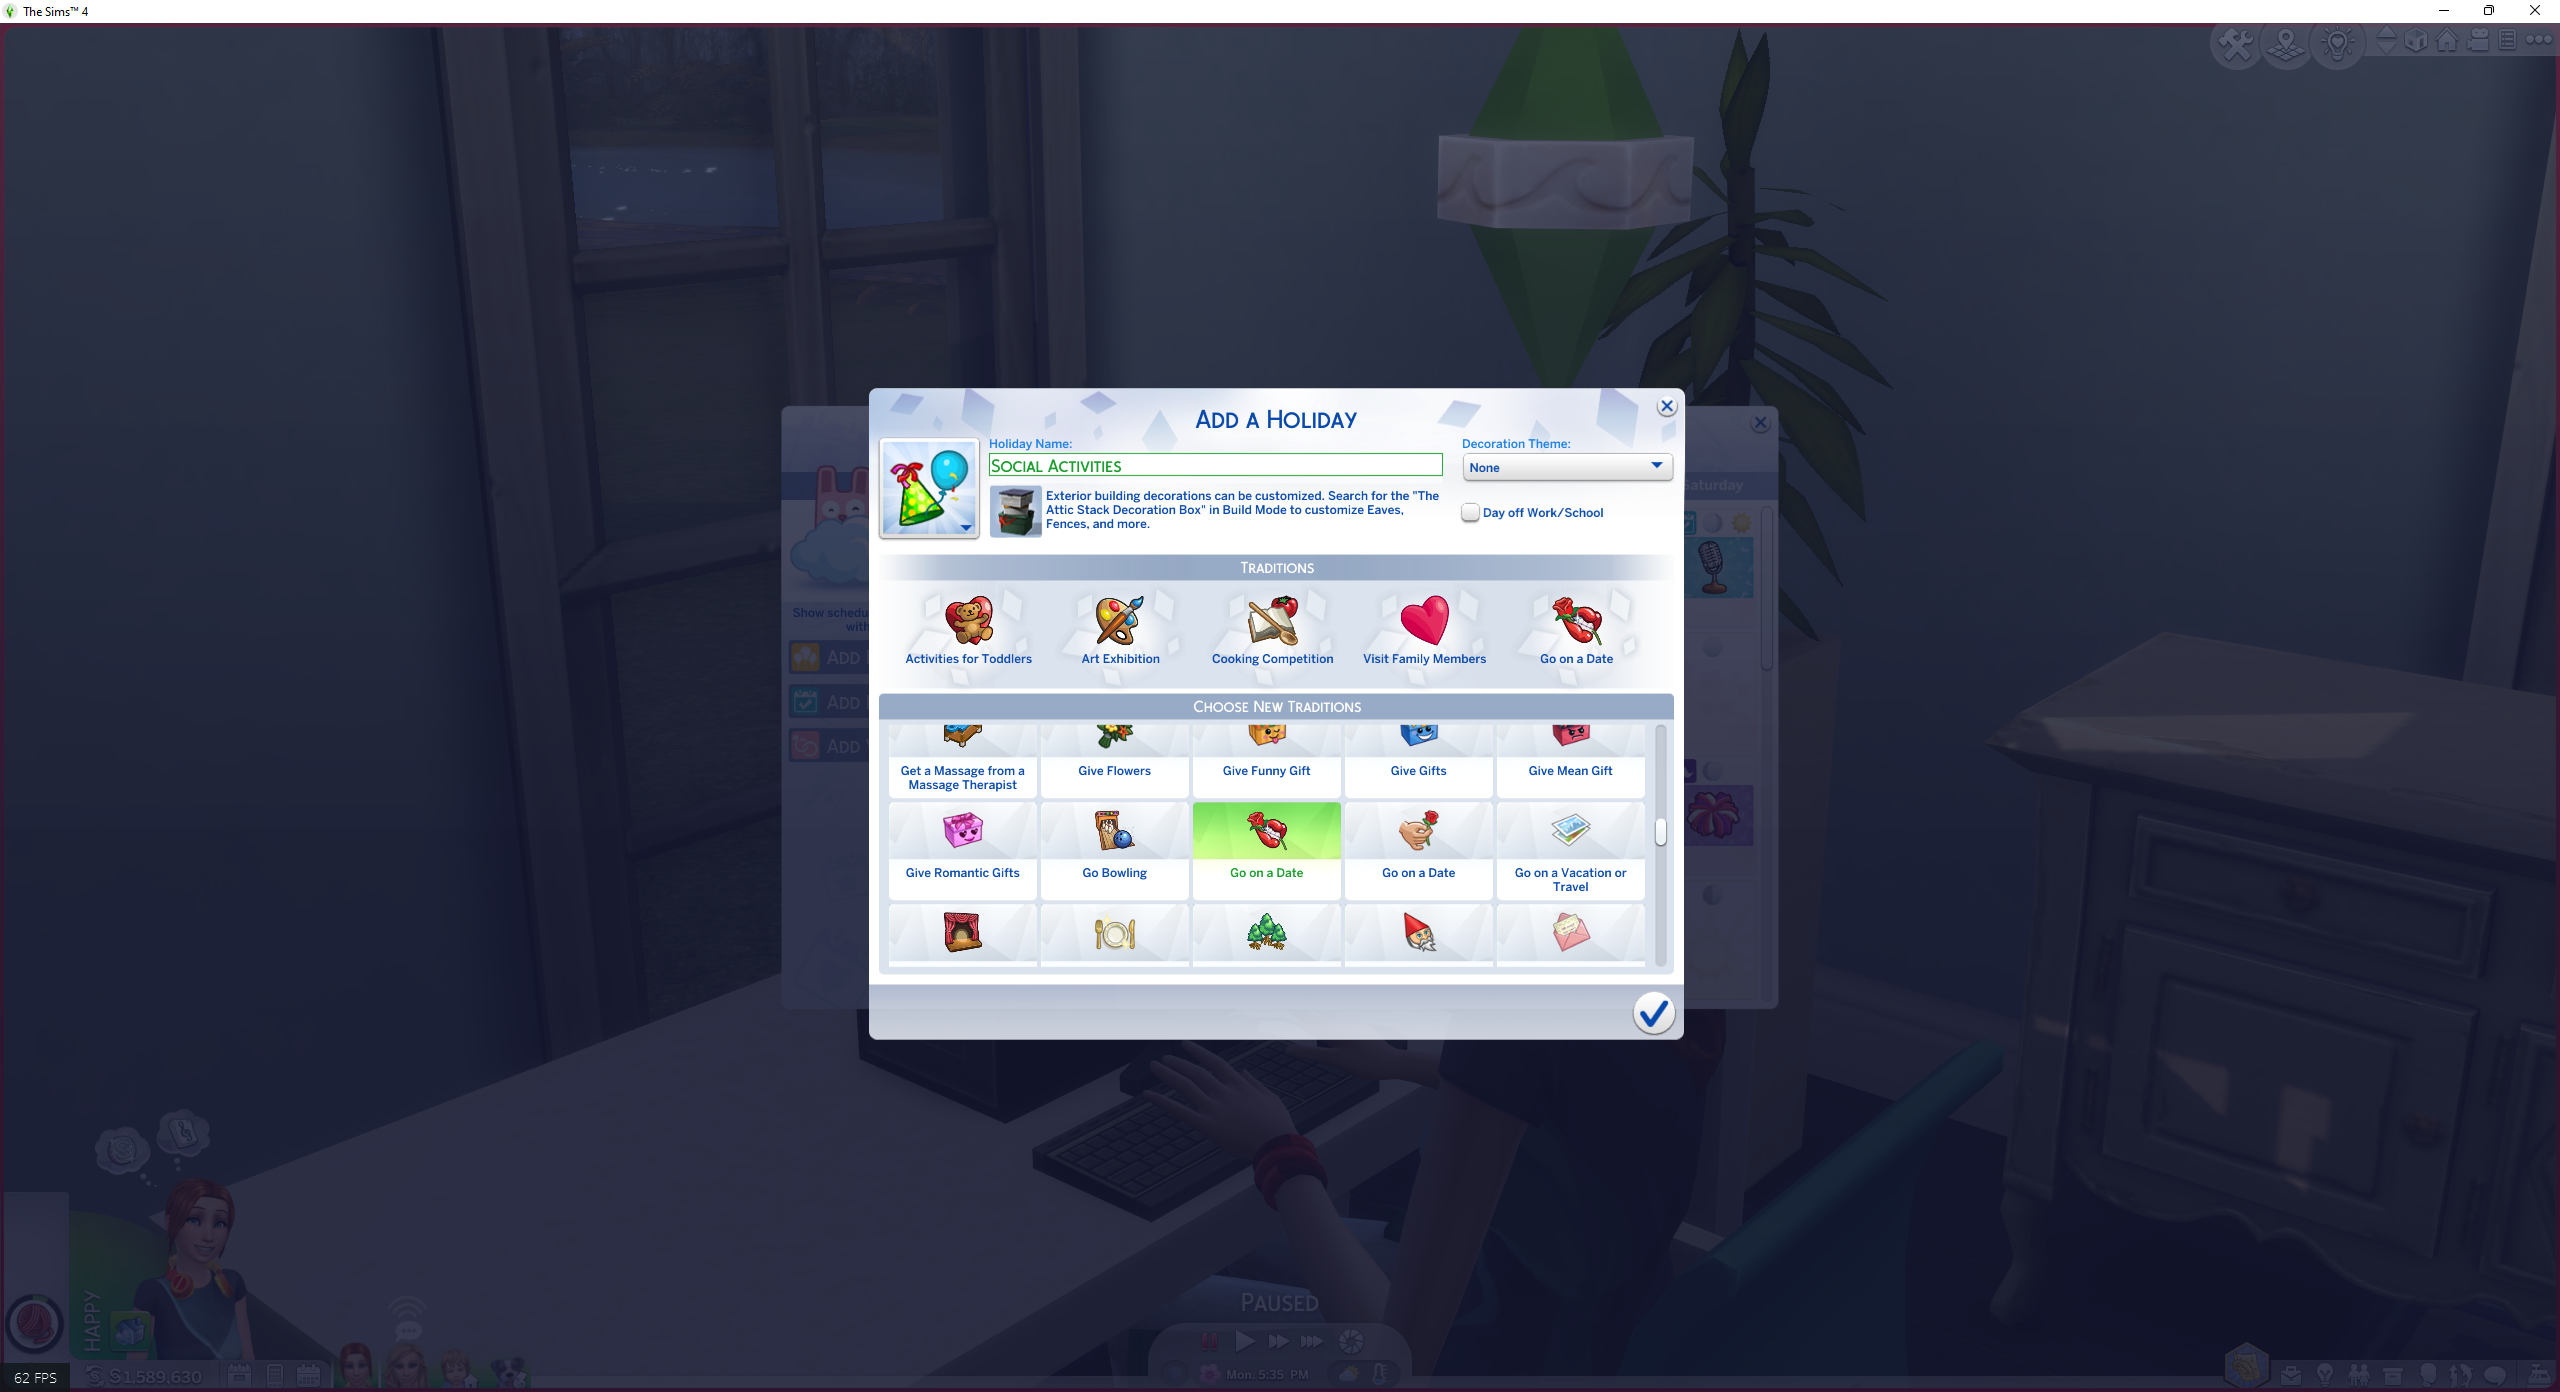 Xtra Interactions - The Sims 4 Mods - CurseForge